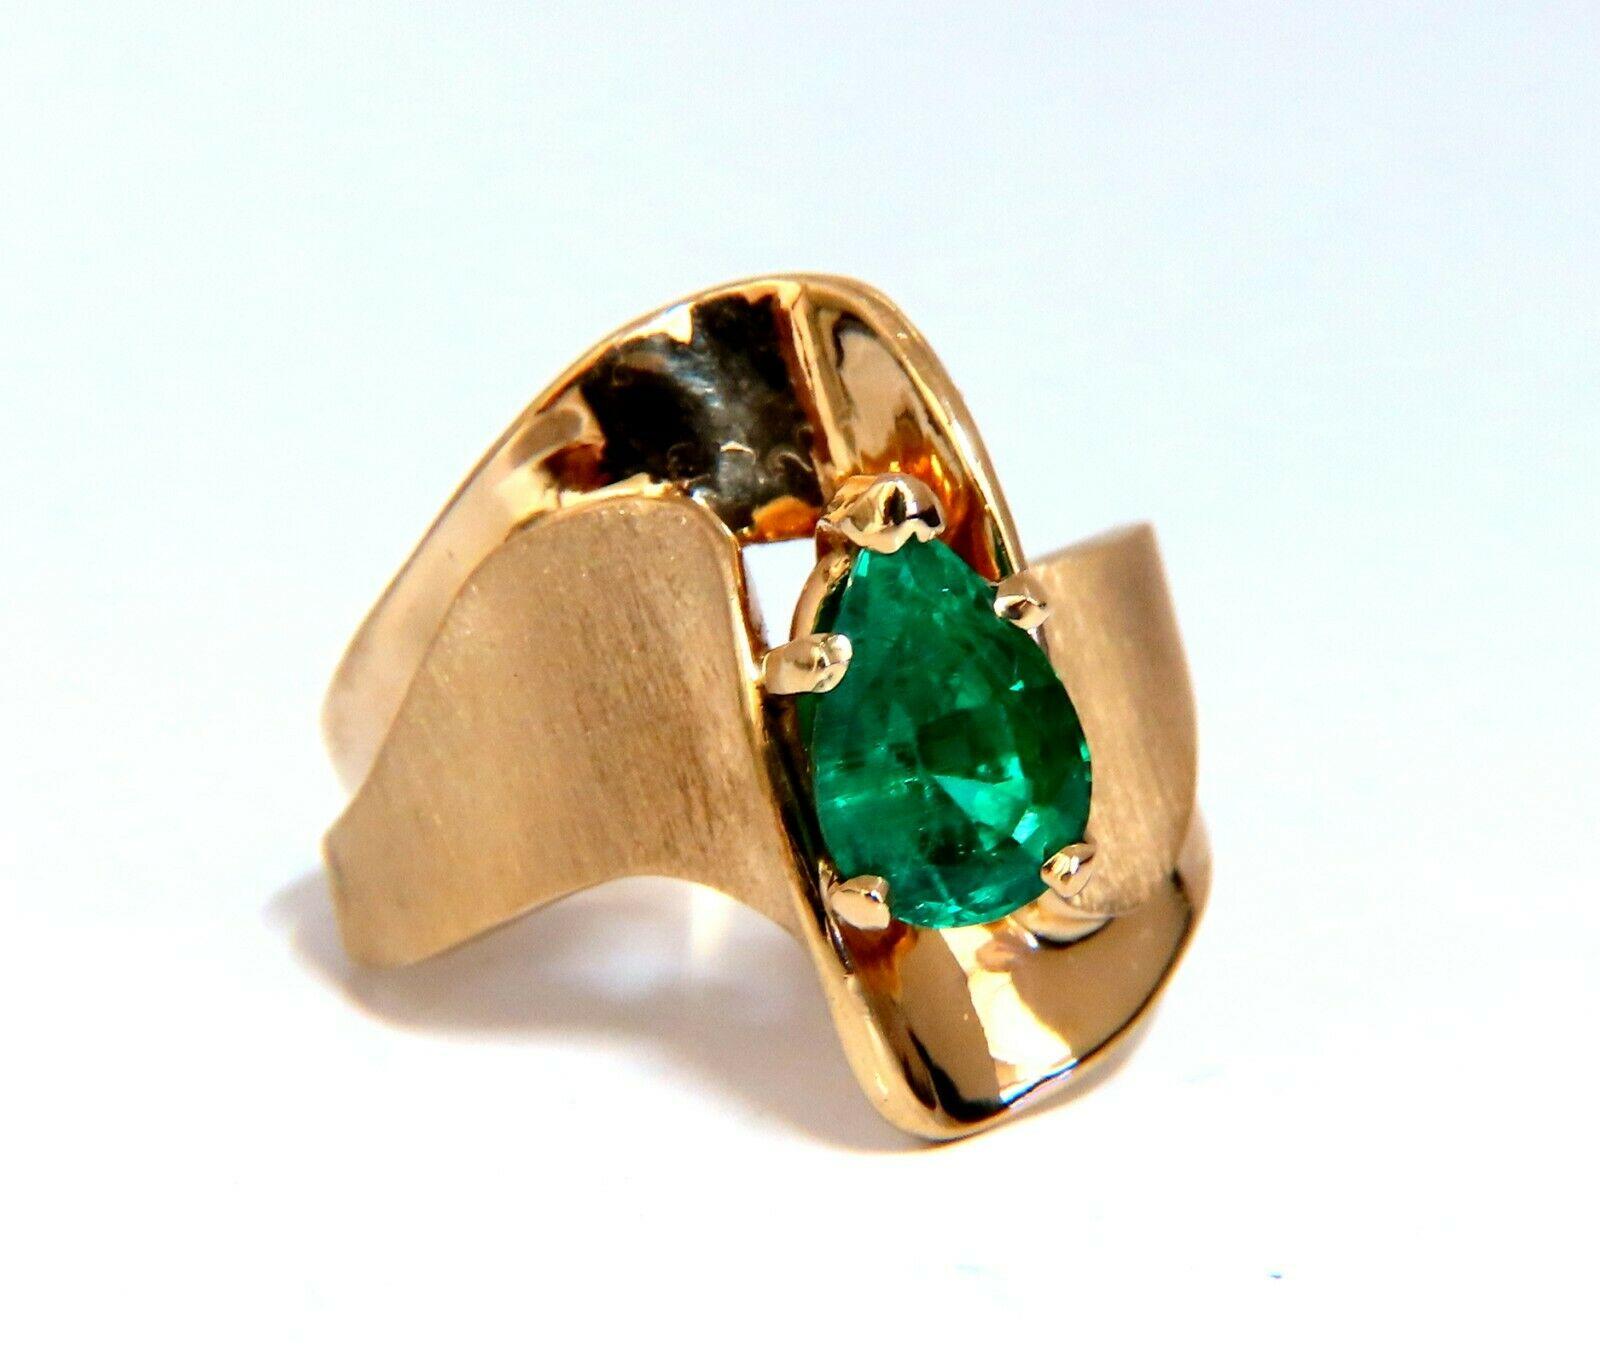 1.44 carat natural emerald ring.

Emerald clean clarity and transparent pear shape. Measures 8x6mm.

14 karat yelliw gold 6.9 grams

19 mm wide

depth 9mm

Size 8 and we may resize please inquire.